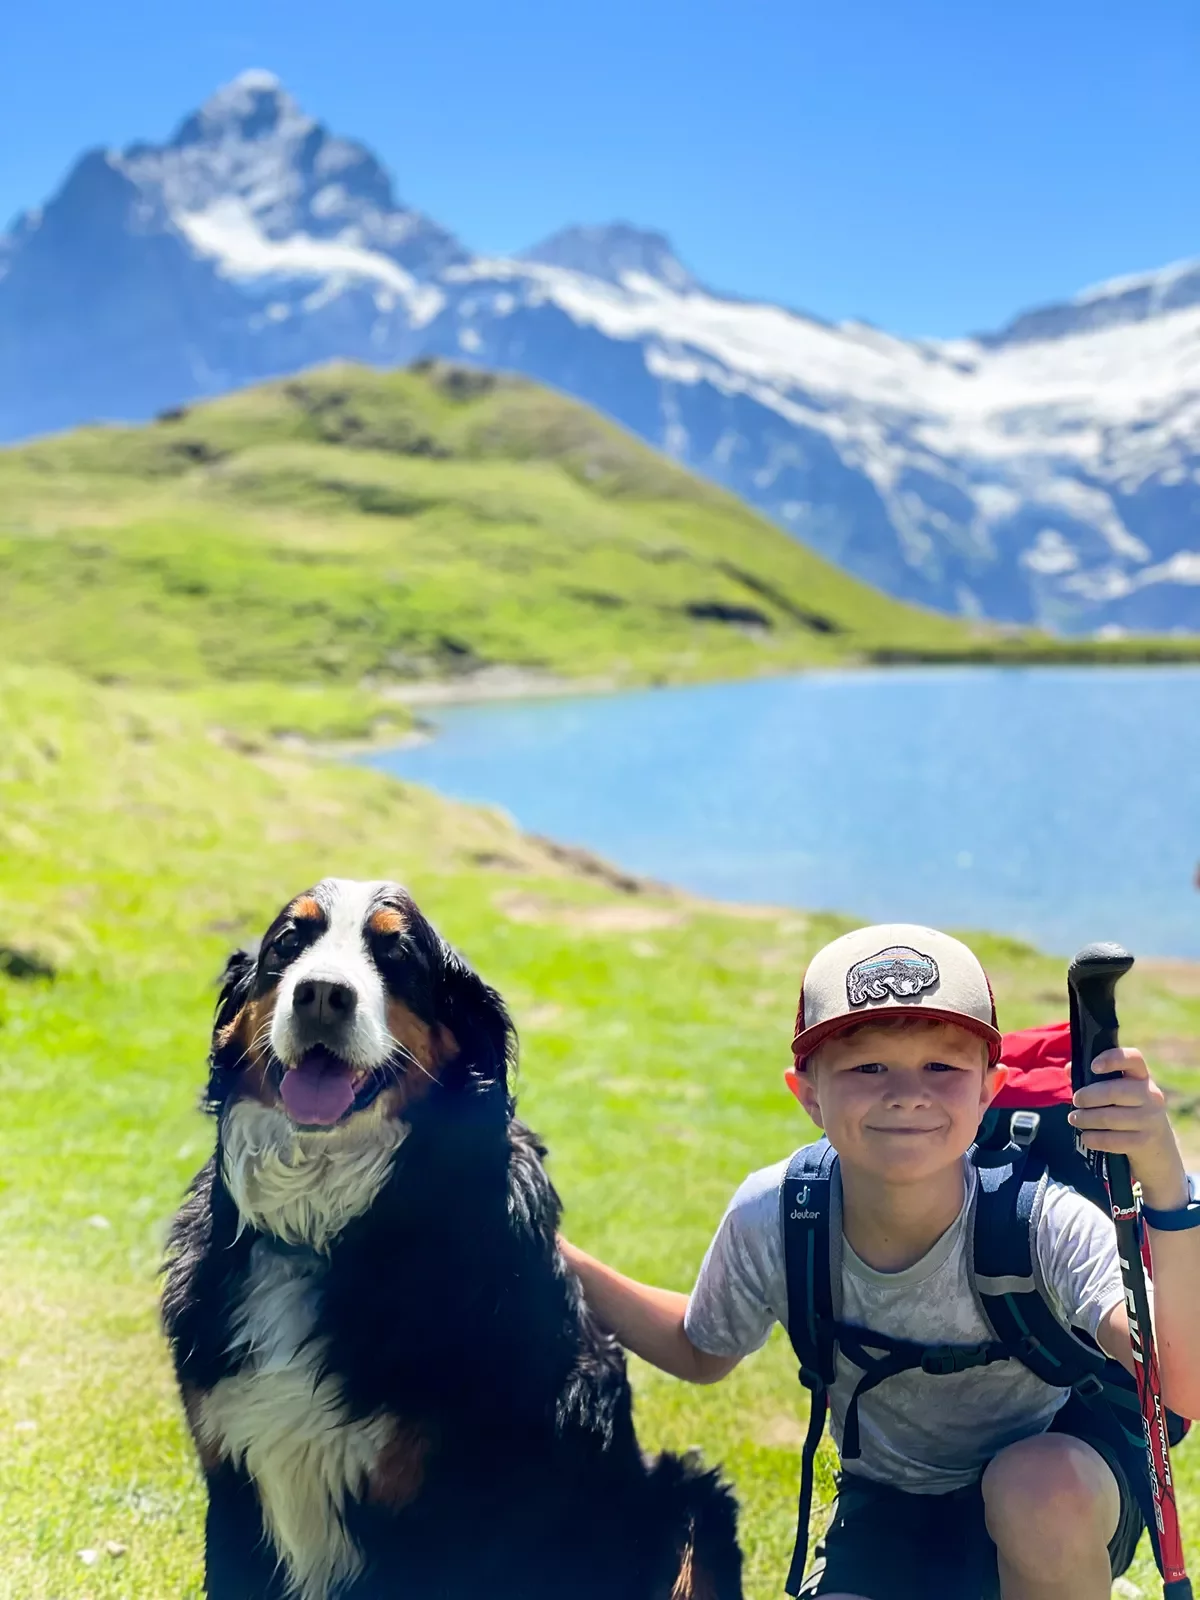 Young guest with dog, lake, mountains in background.